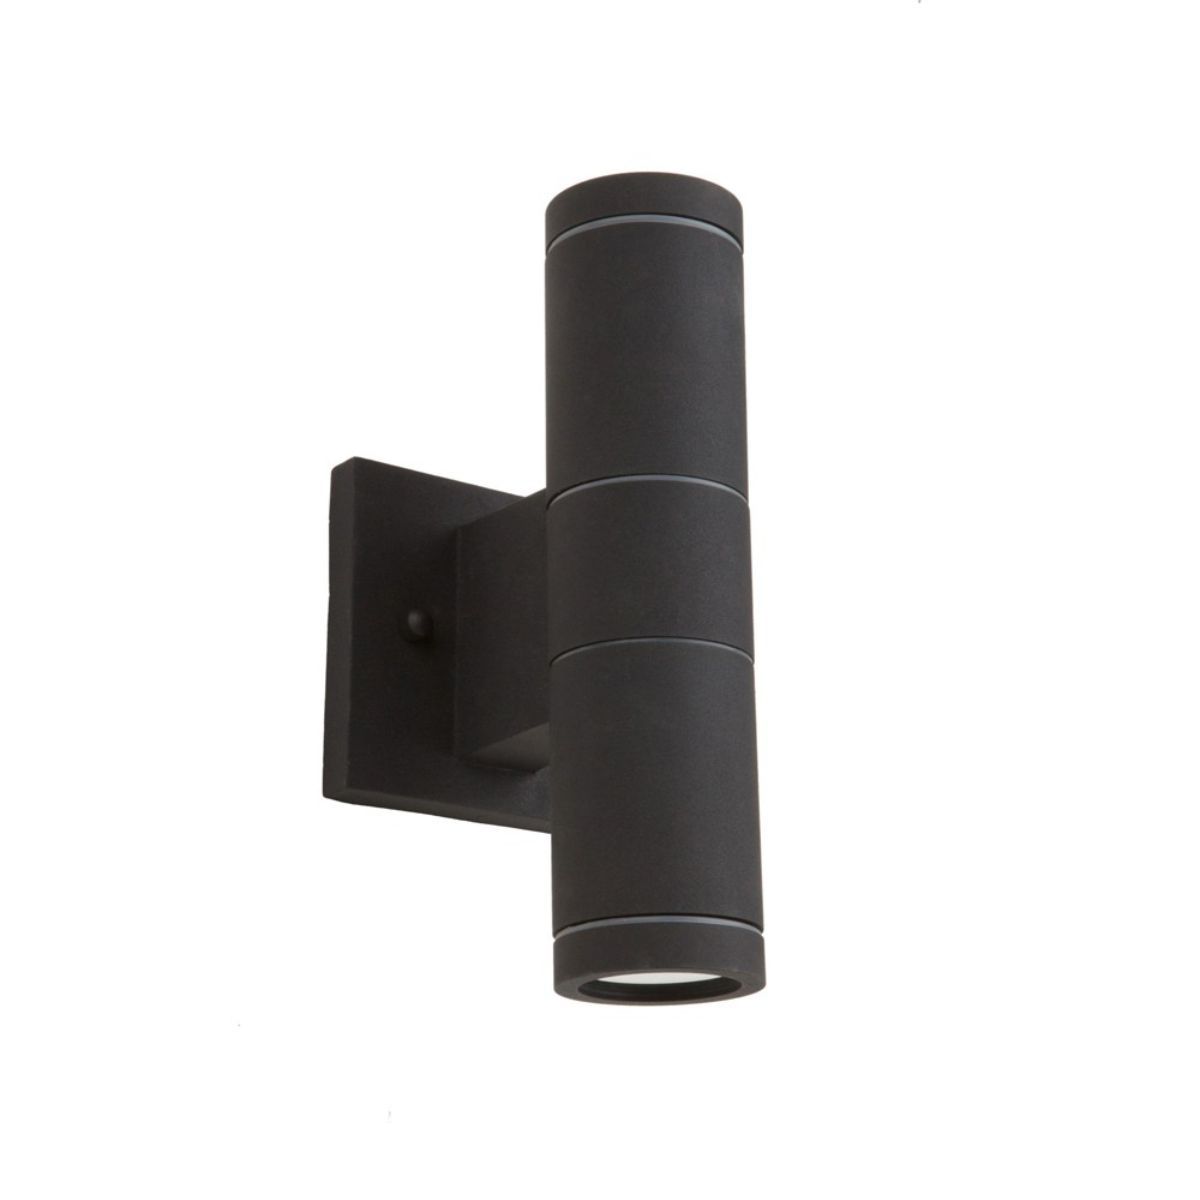 Nuevo 10 In 2 Lights Outdoor Cylinder Wall Light Up/Down Lights Matte Black Finish